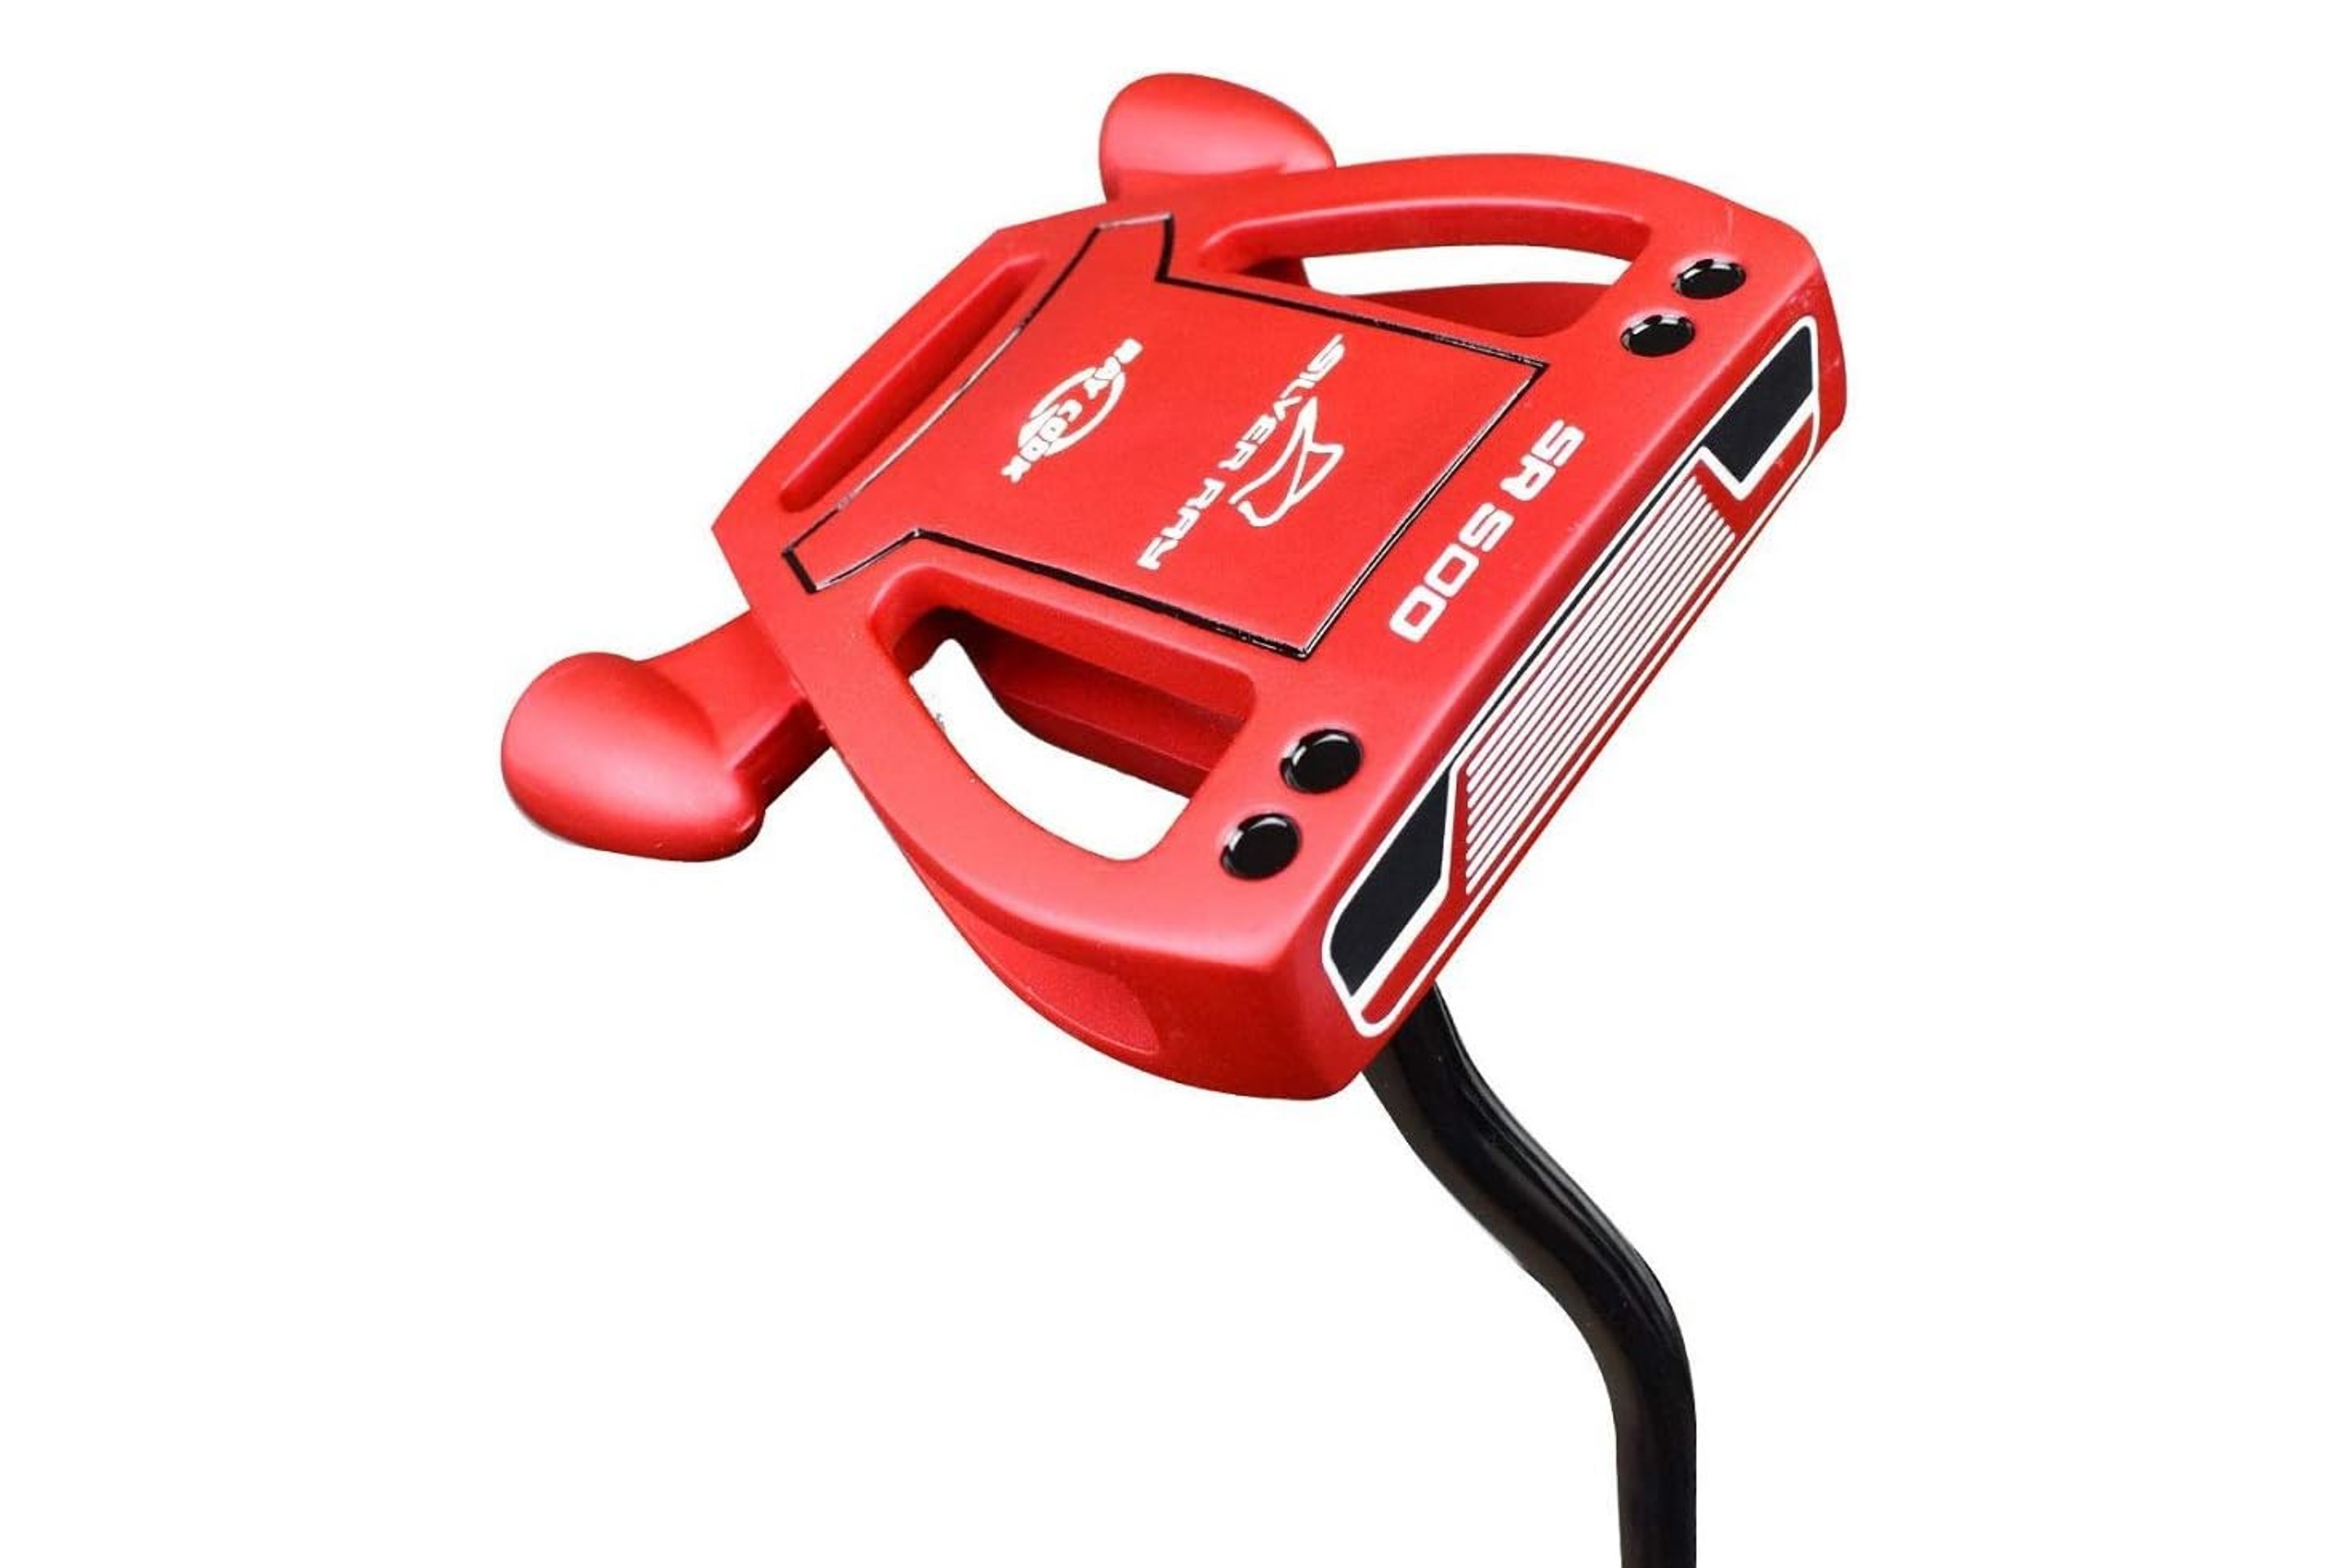 Ray Cook SR500 Putter